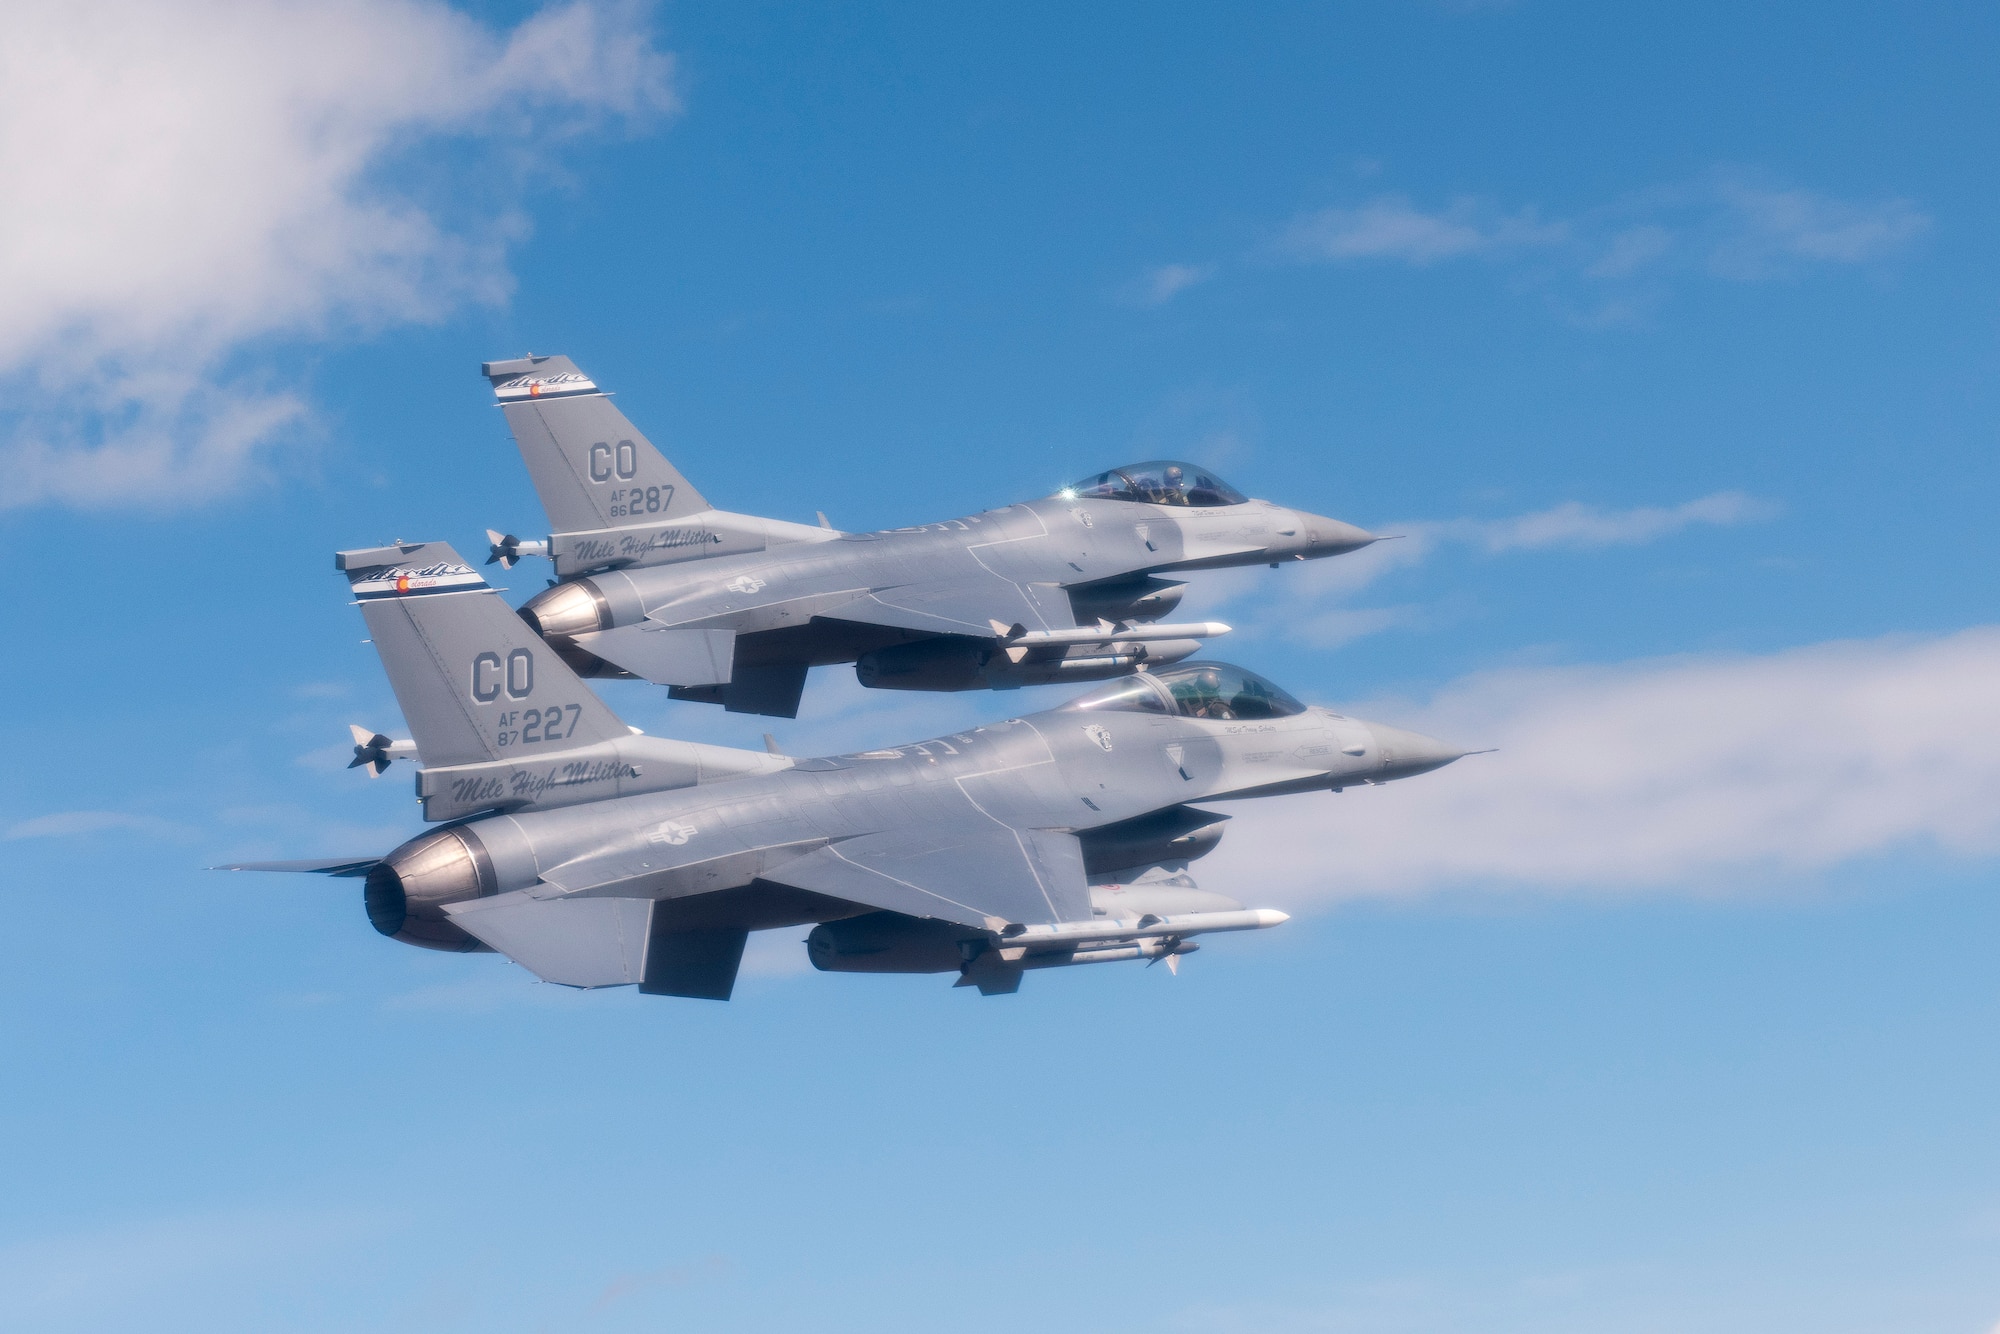 Two F-16 Fighting Falcons from the 120th Fighter Squadron, 140th Wing, Colorado Air National Guard, fly over the Denver-Metro area May 29, 2015. (Air National Guard Photo by Tech. Sgt. Wolfram Stumpf)